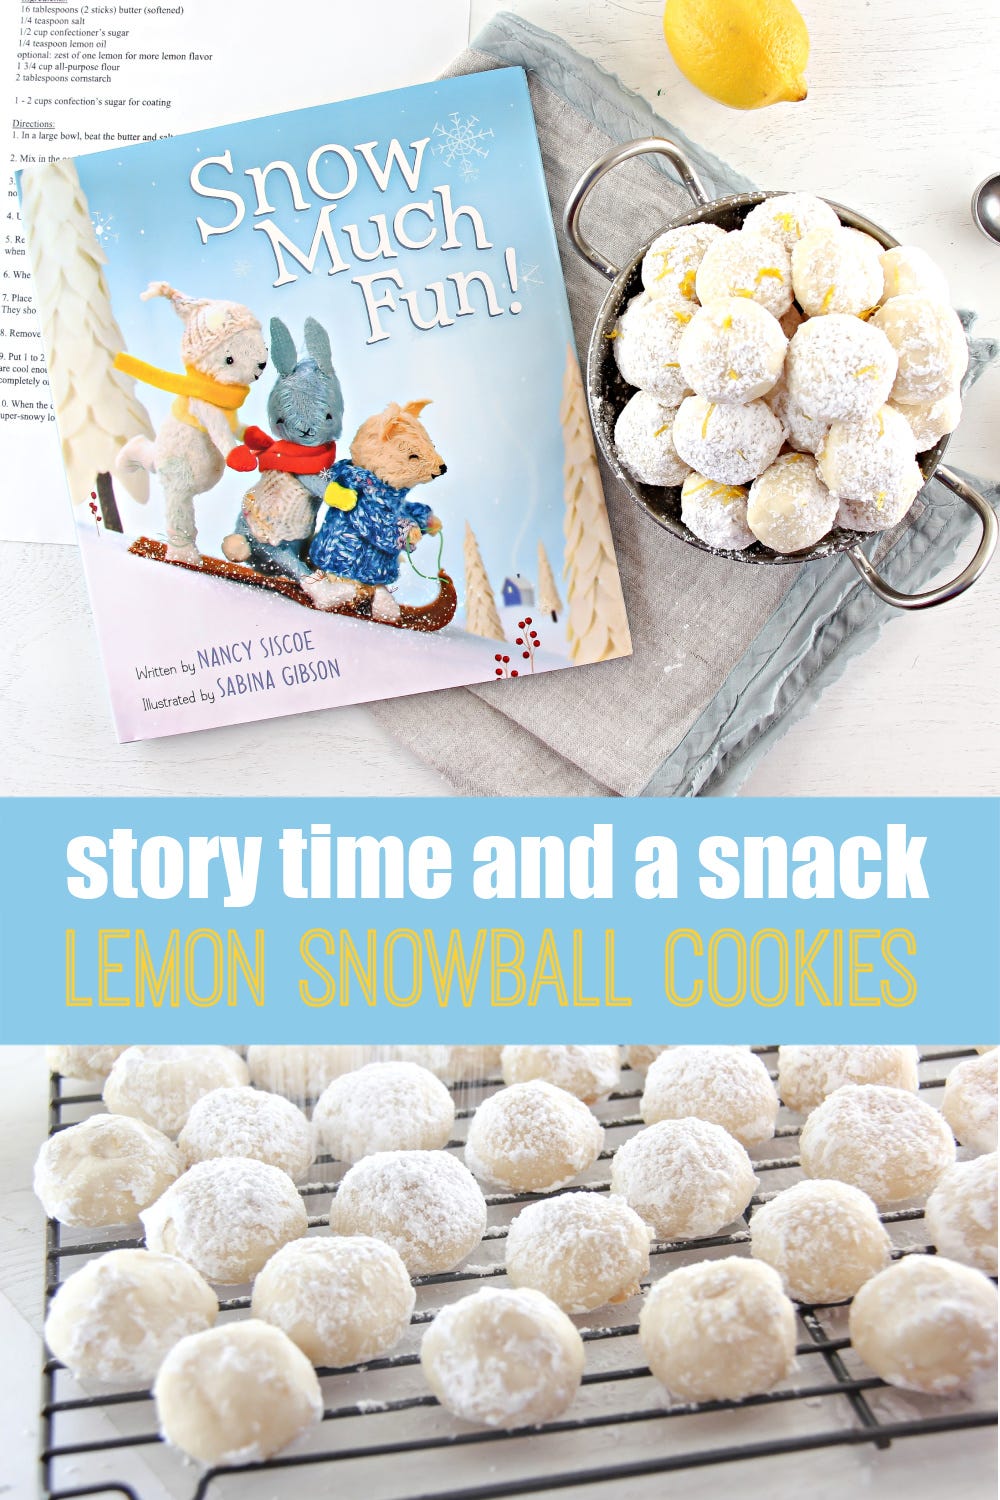 story time and a snack — lemon snowball cookies